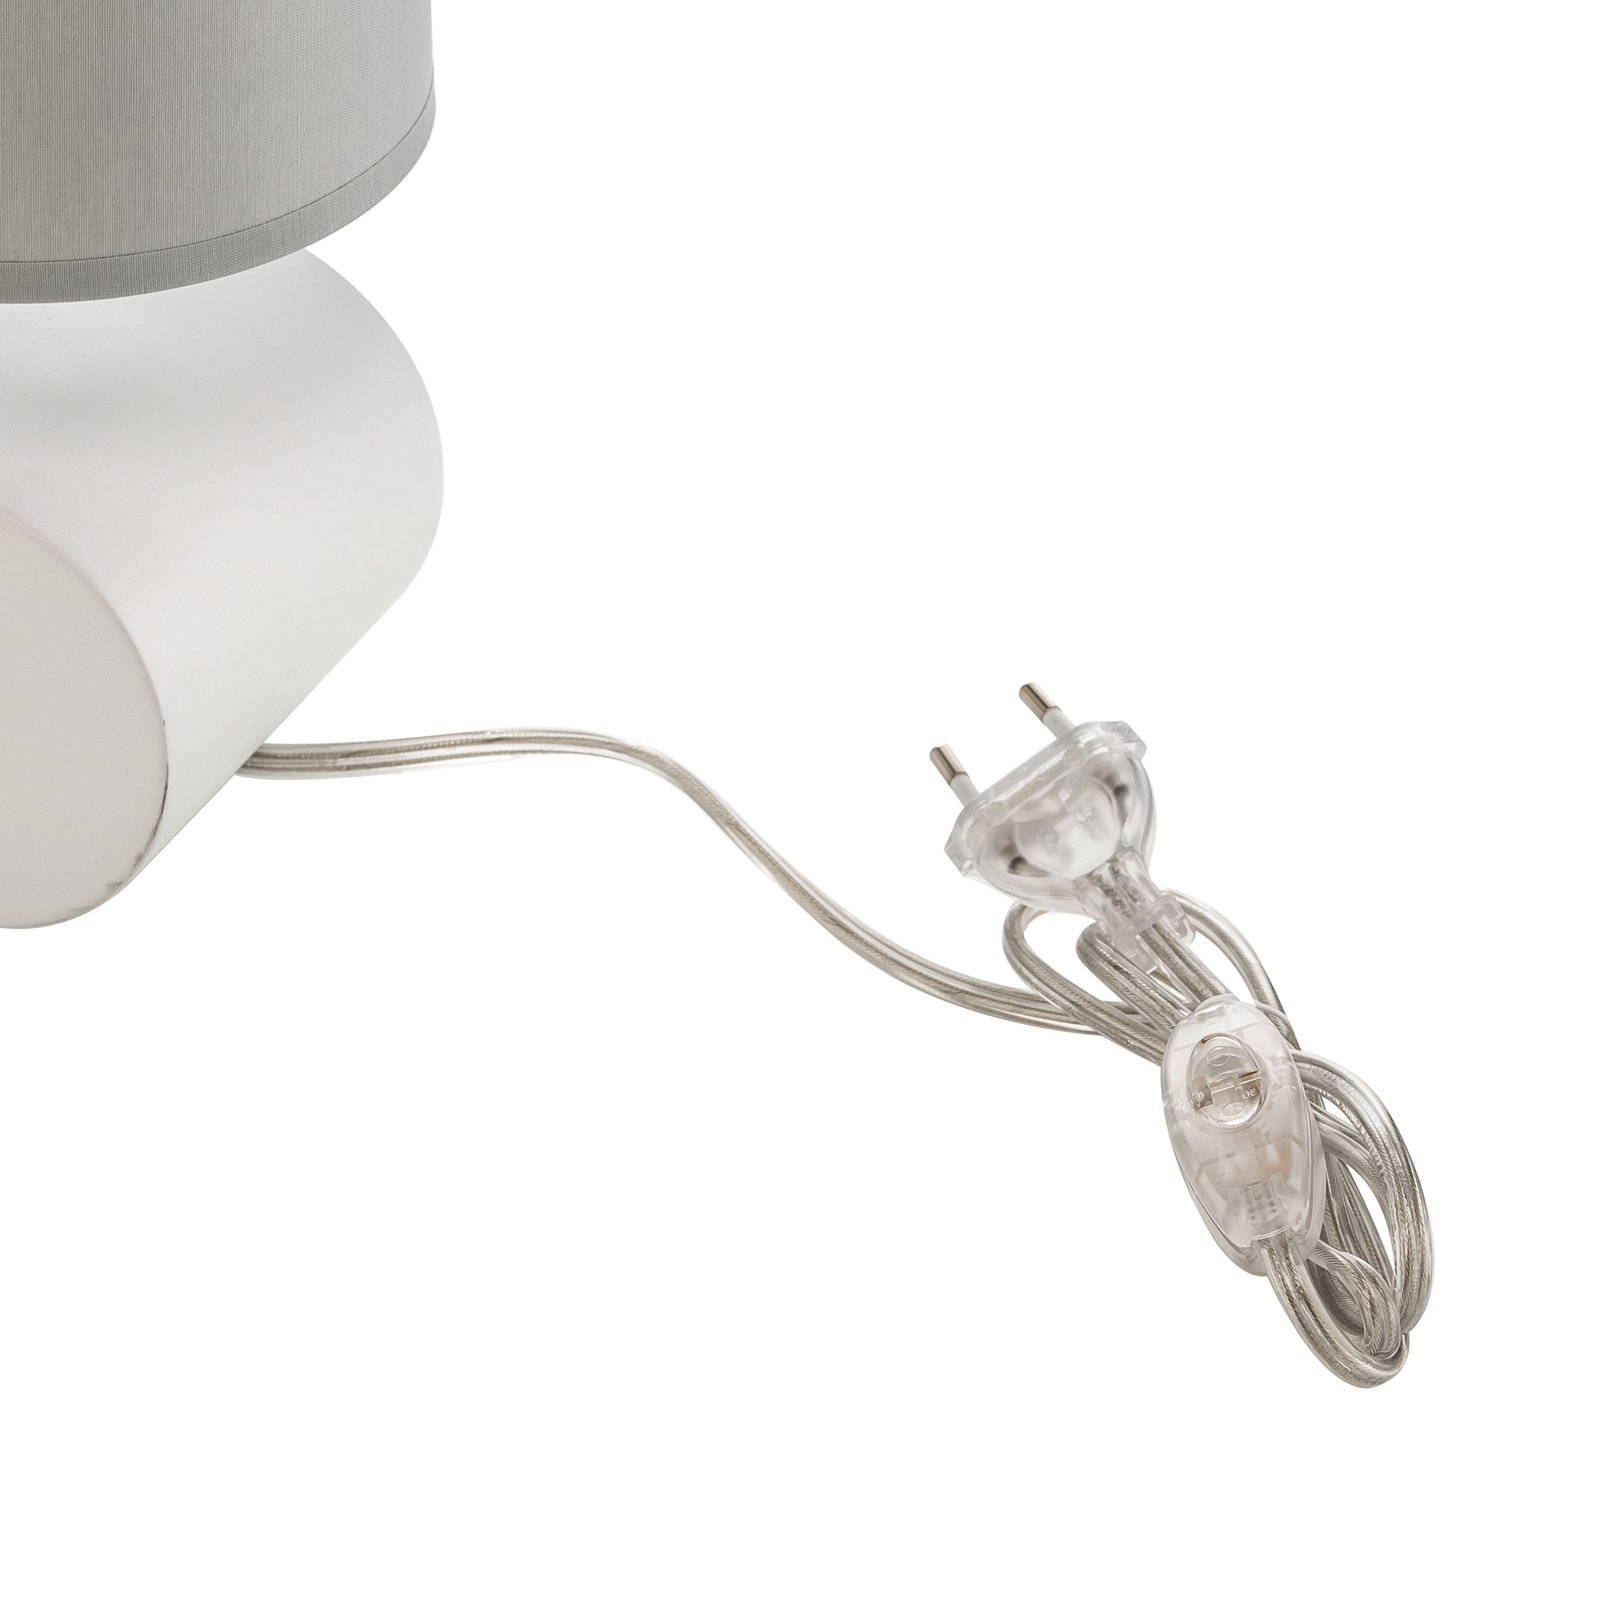 Cassy table lamp, white base grey fabric lampshade